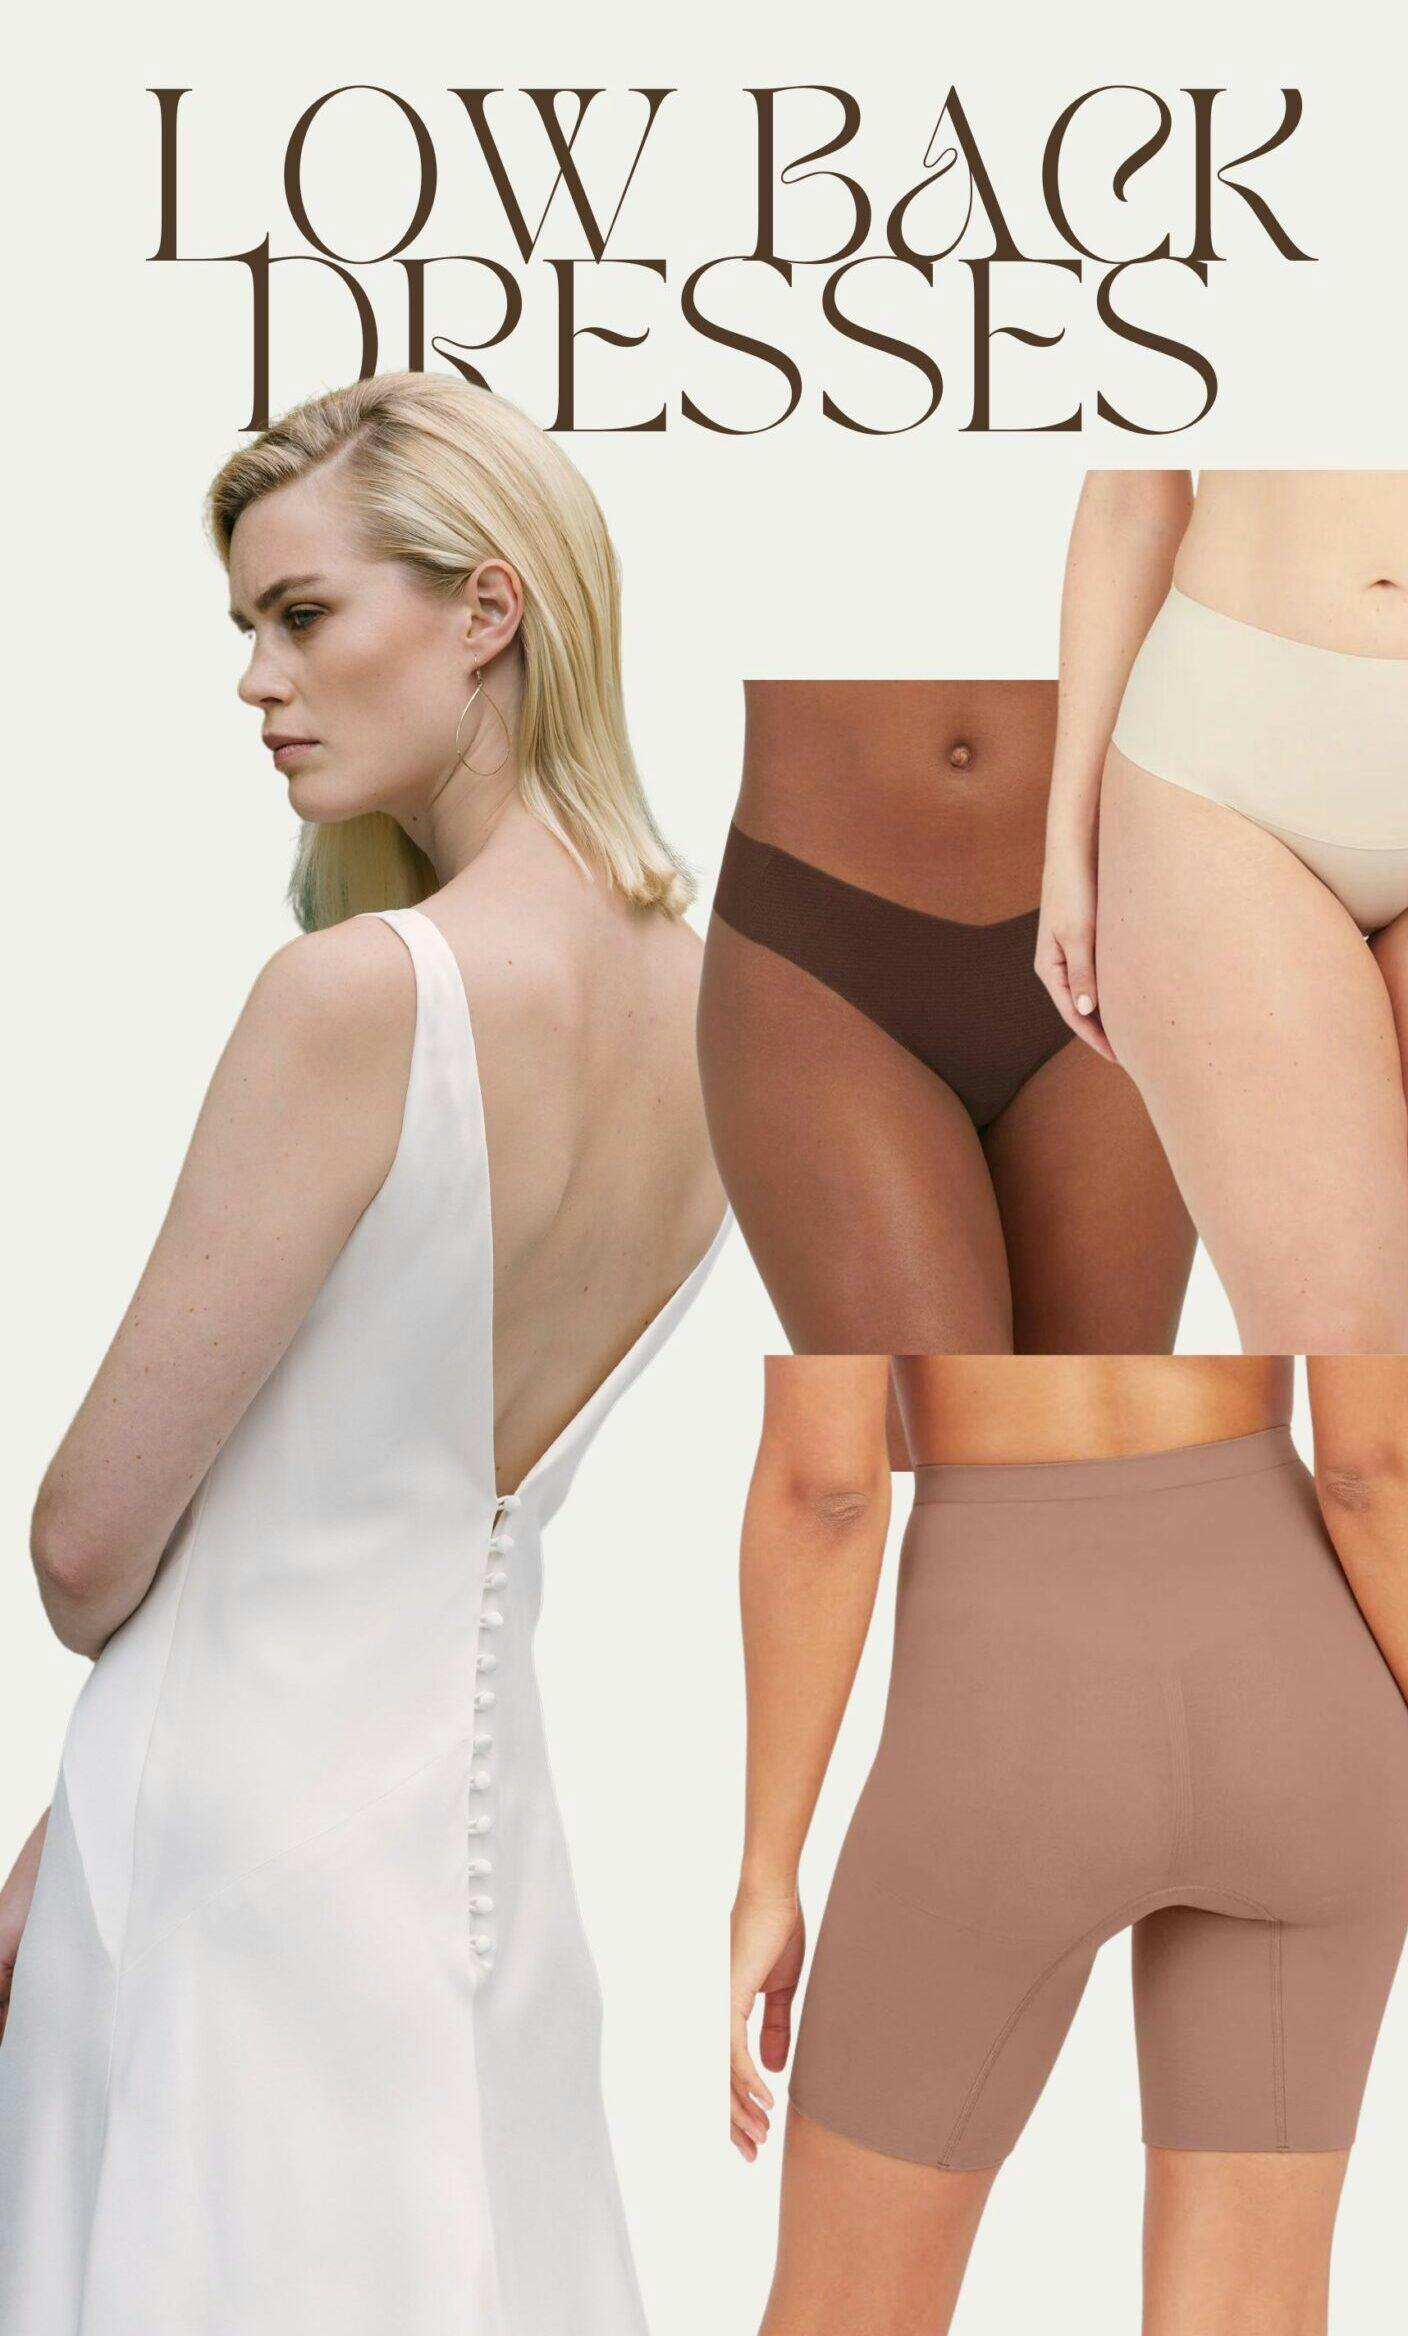 Are you wearing the right wedding underwear for your dream dress